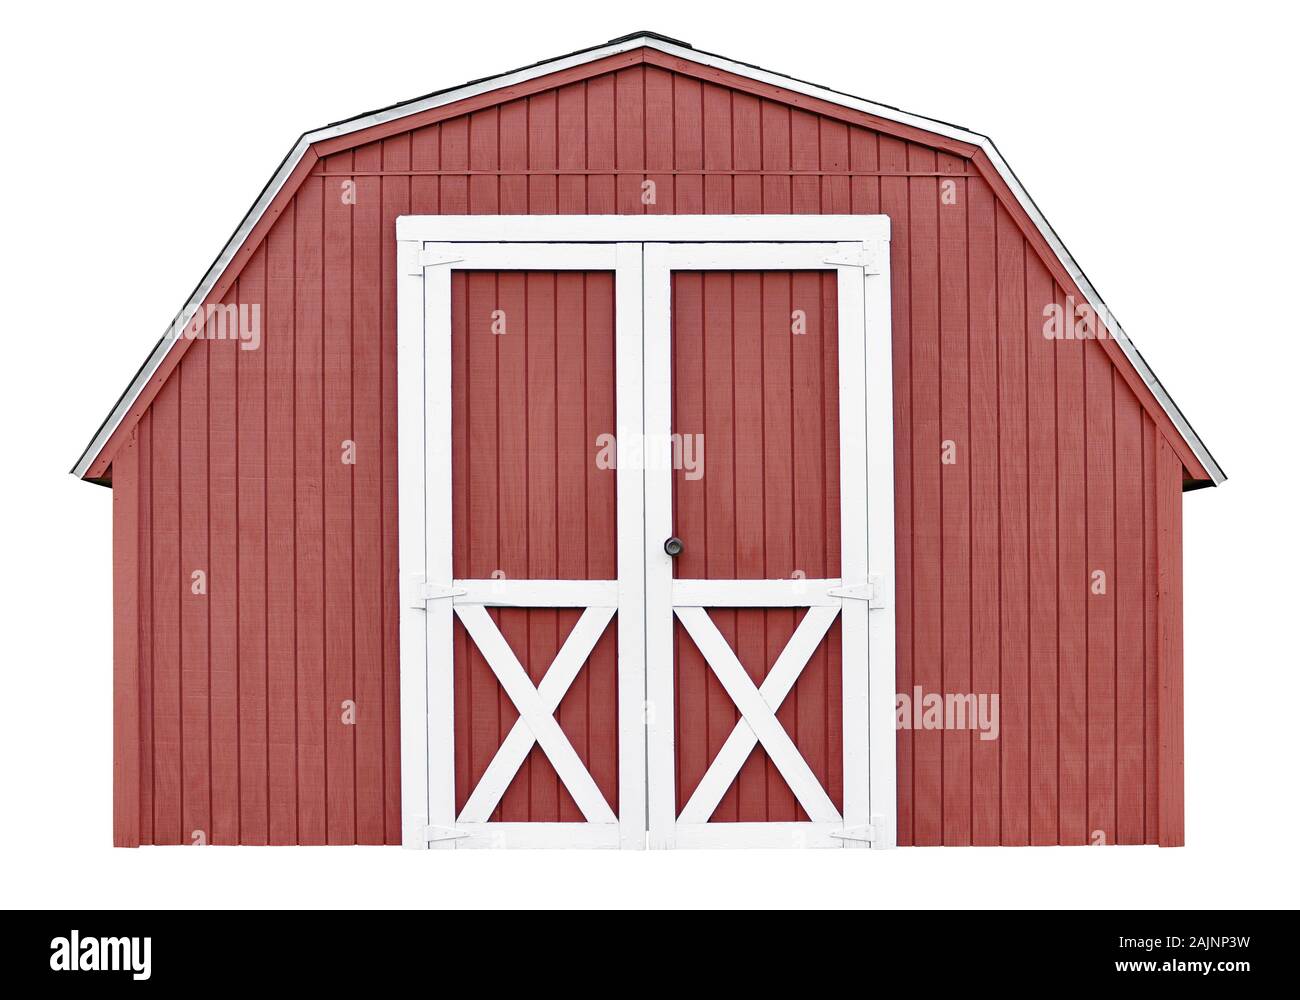 Barn style utility tool shed for garden and farm equipment, isolated on white background Stock Photo